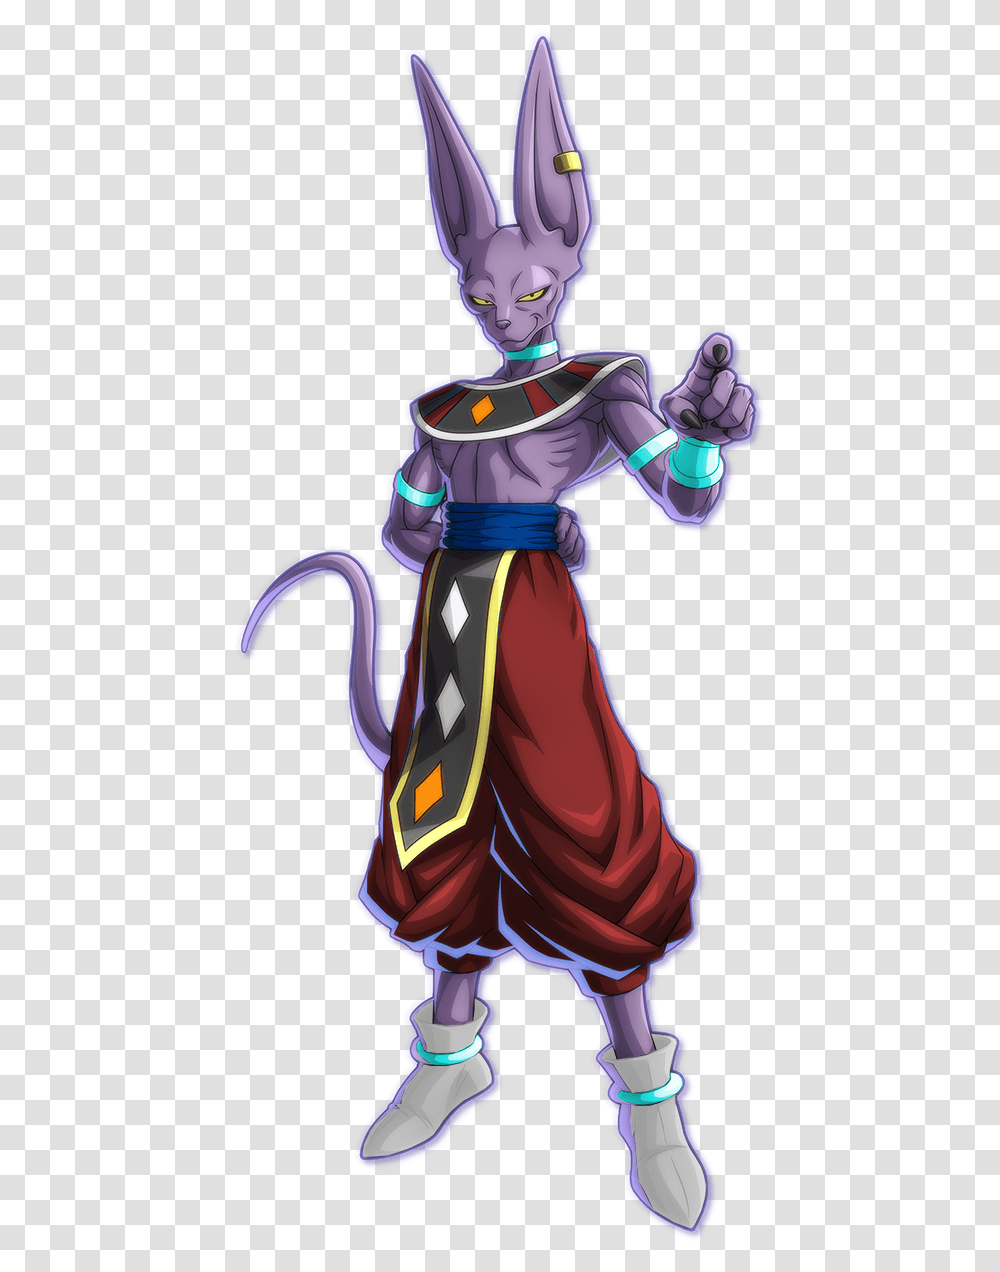 Created Renders For Every Single Recolor That Has Been Beerus Dragon Ball Fighterz, Graphics, Art, Toy, Clothing Transparent Png